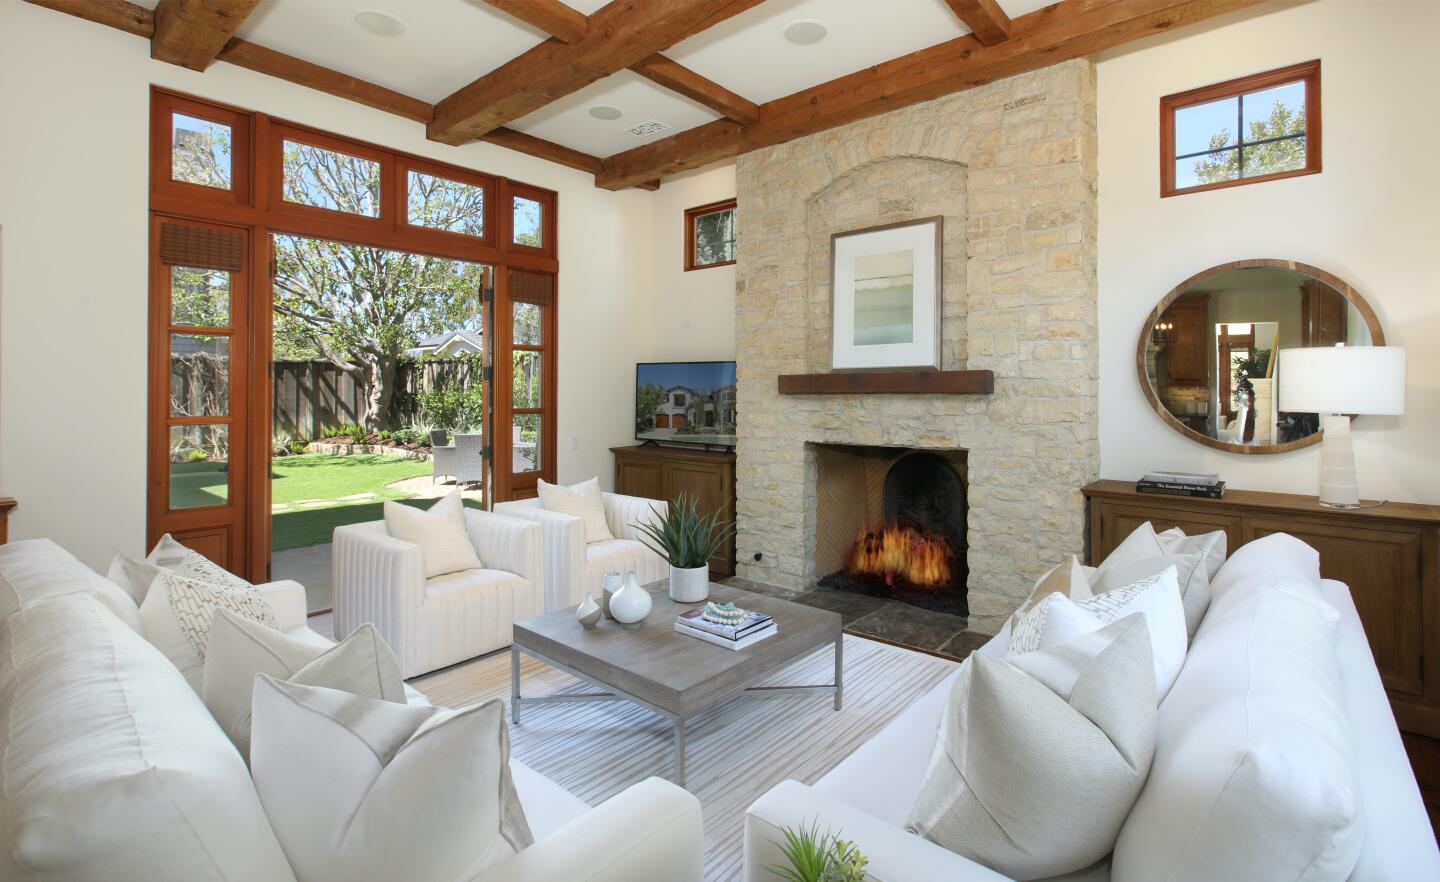 French doors, wood-beam ceilings and a stone fireplace.